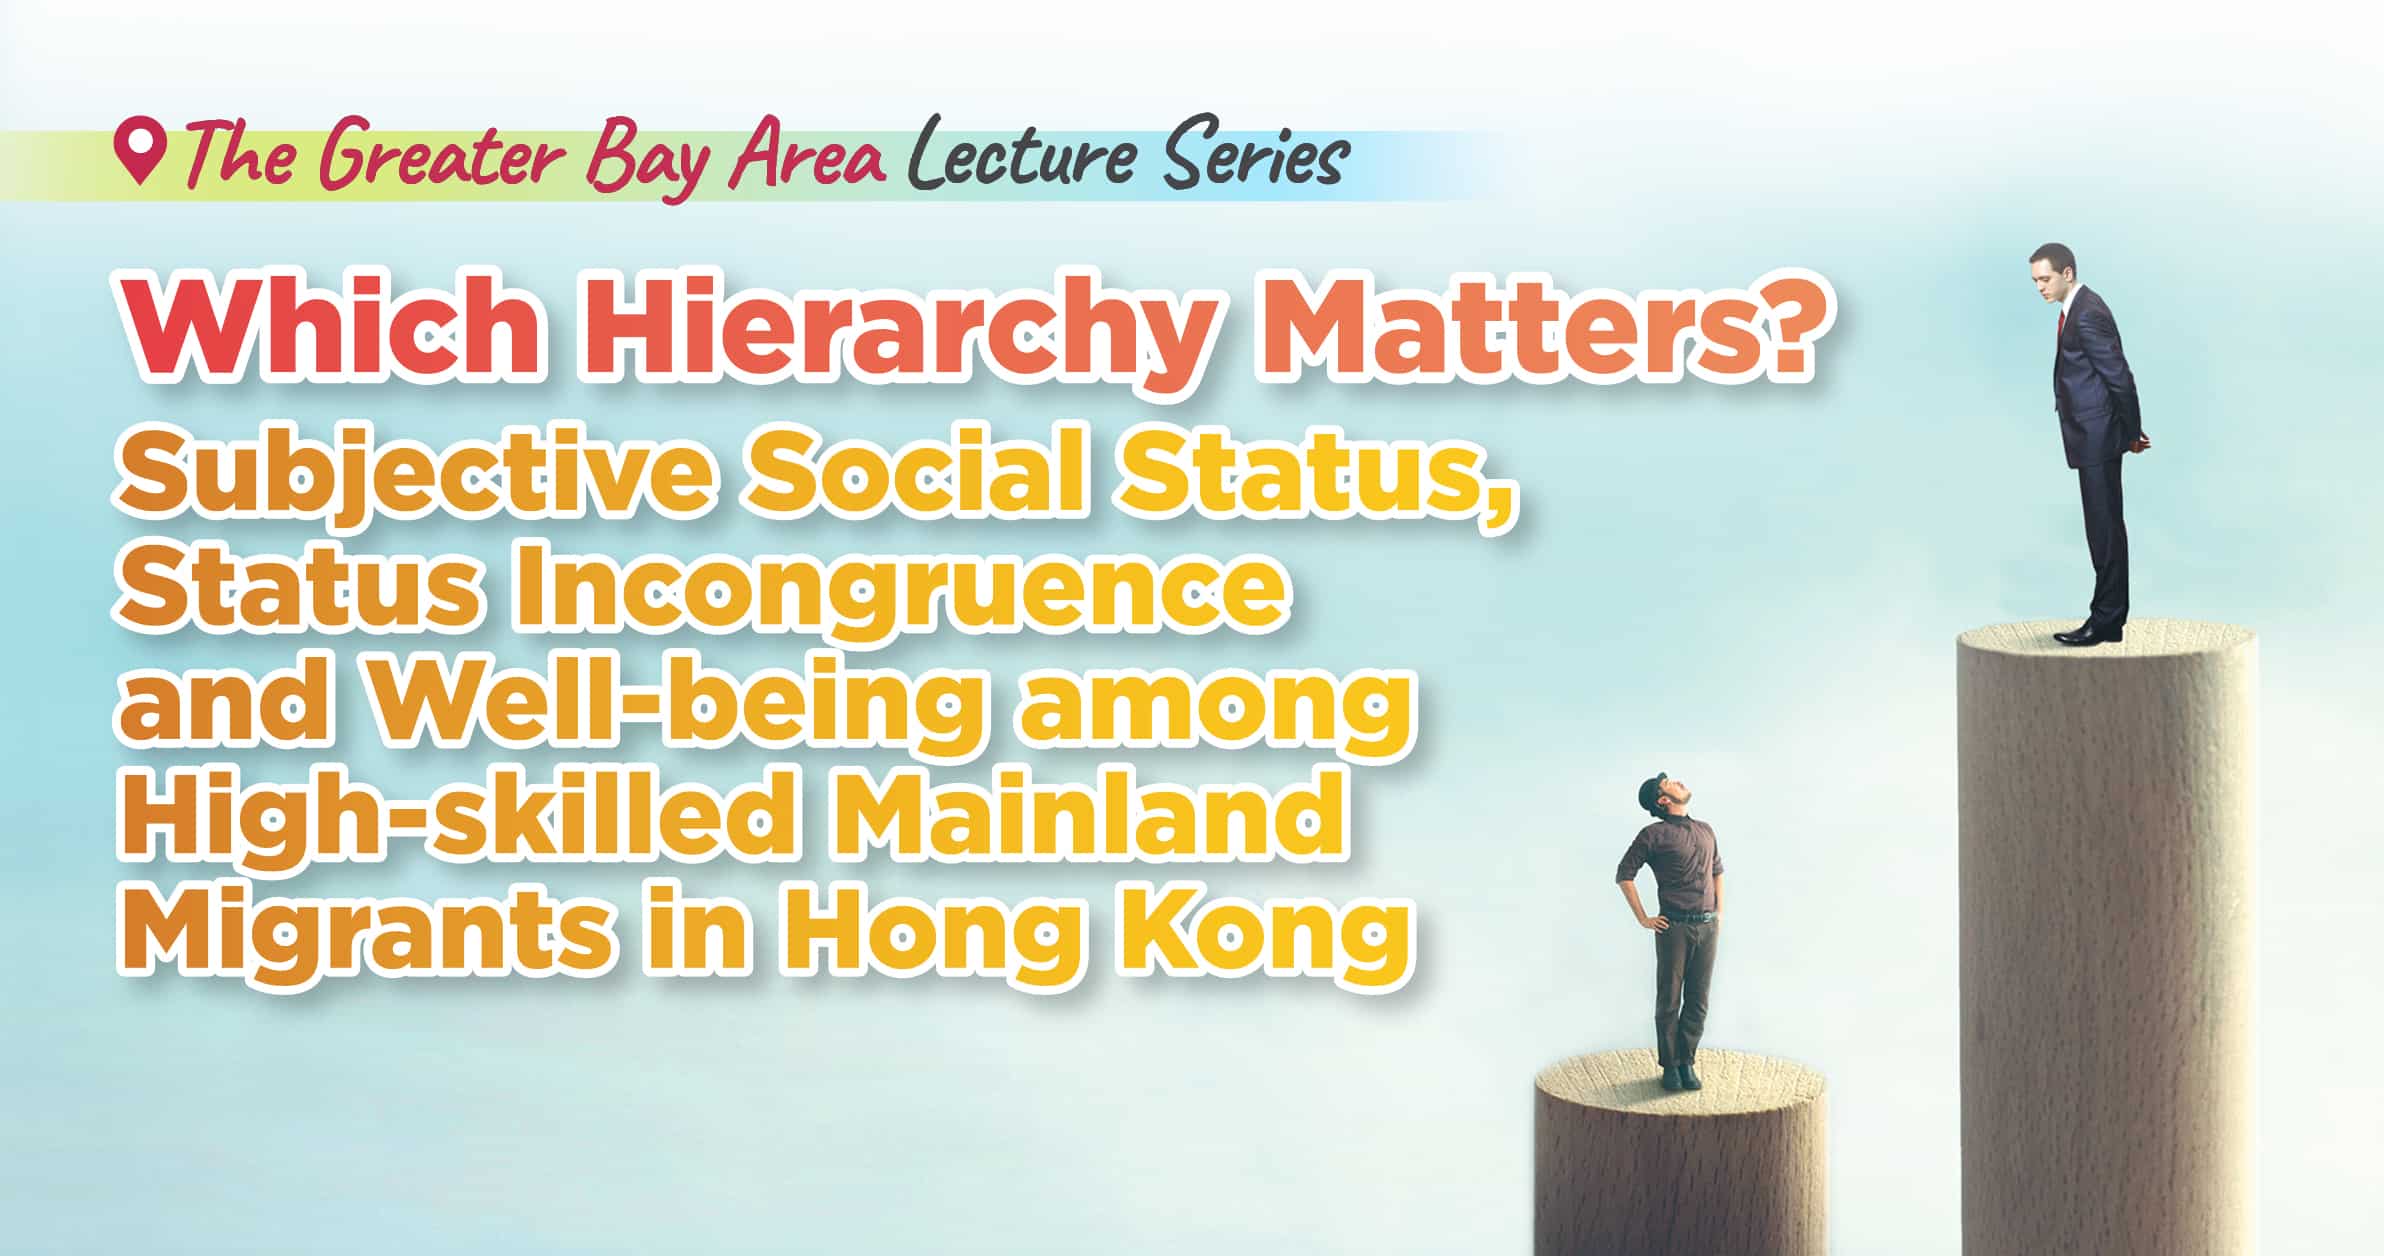 Which Hierarchy Matters? Subjective Social Status, Status Incongruence and Well-being among High-skilled Mainland Migrants in Hong Kong